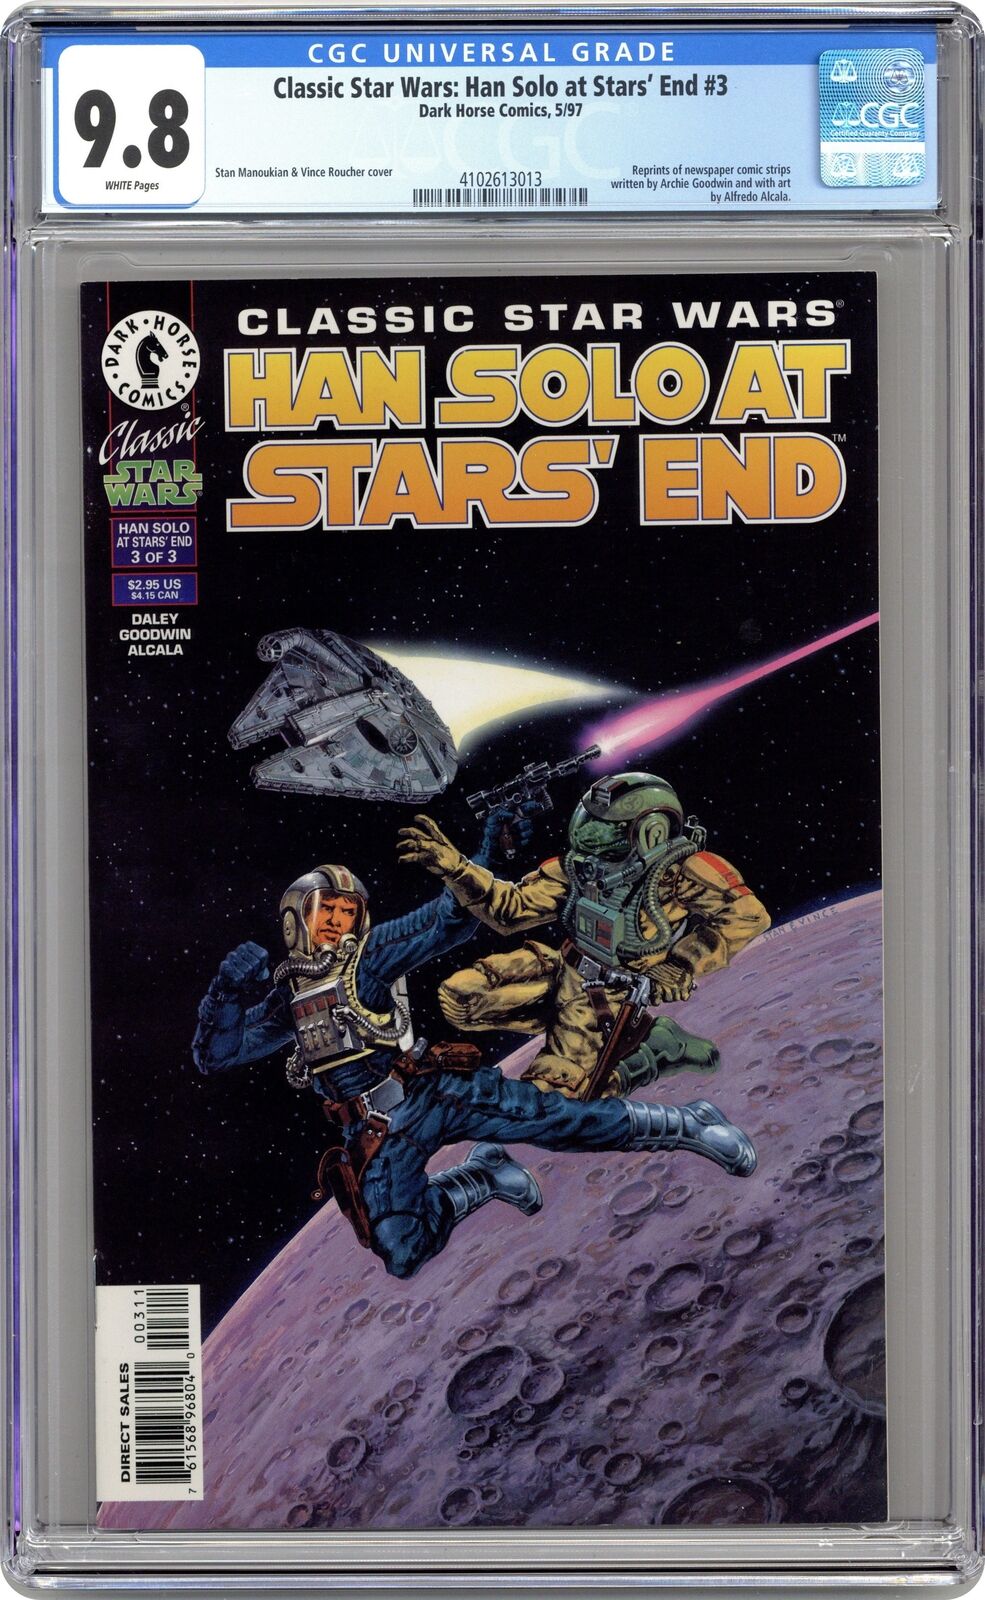 Classic Star Wars Han Solo at Stars' End #3 CGC 9.8 1997 4102613013